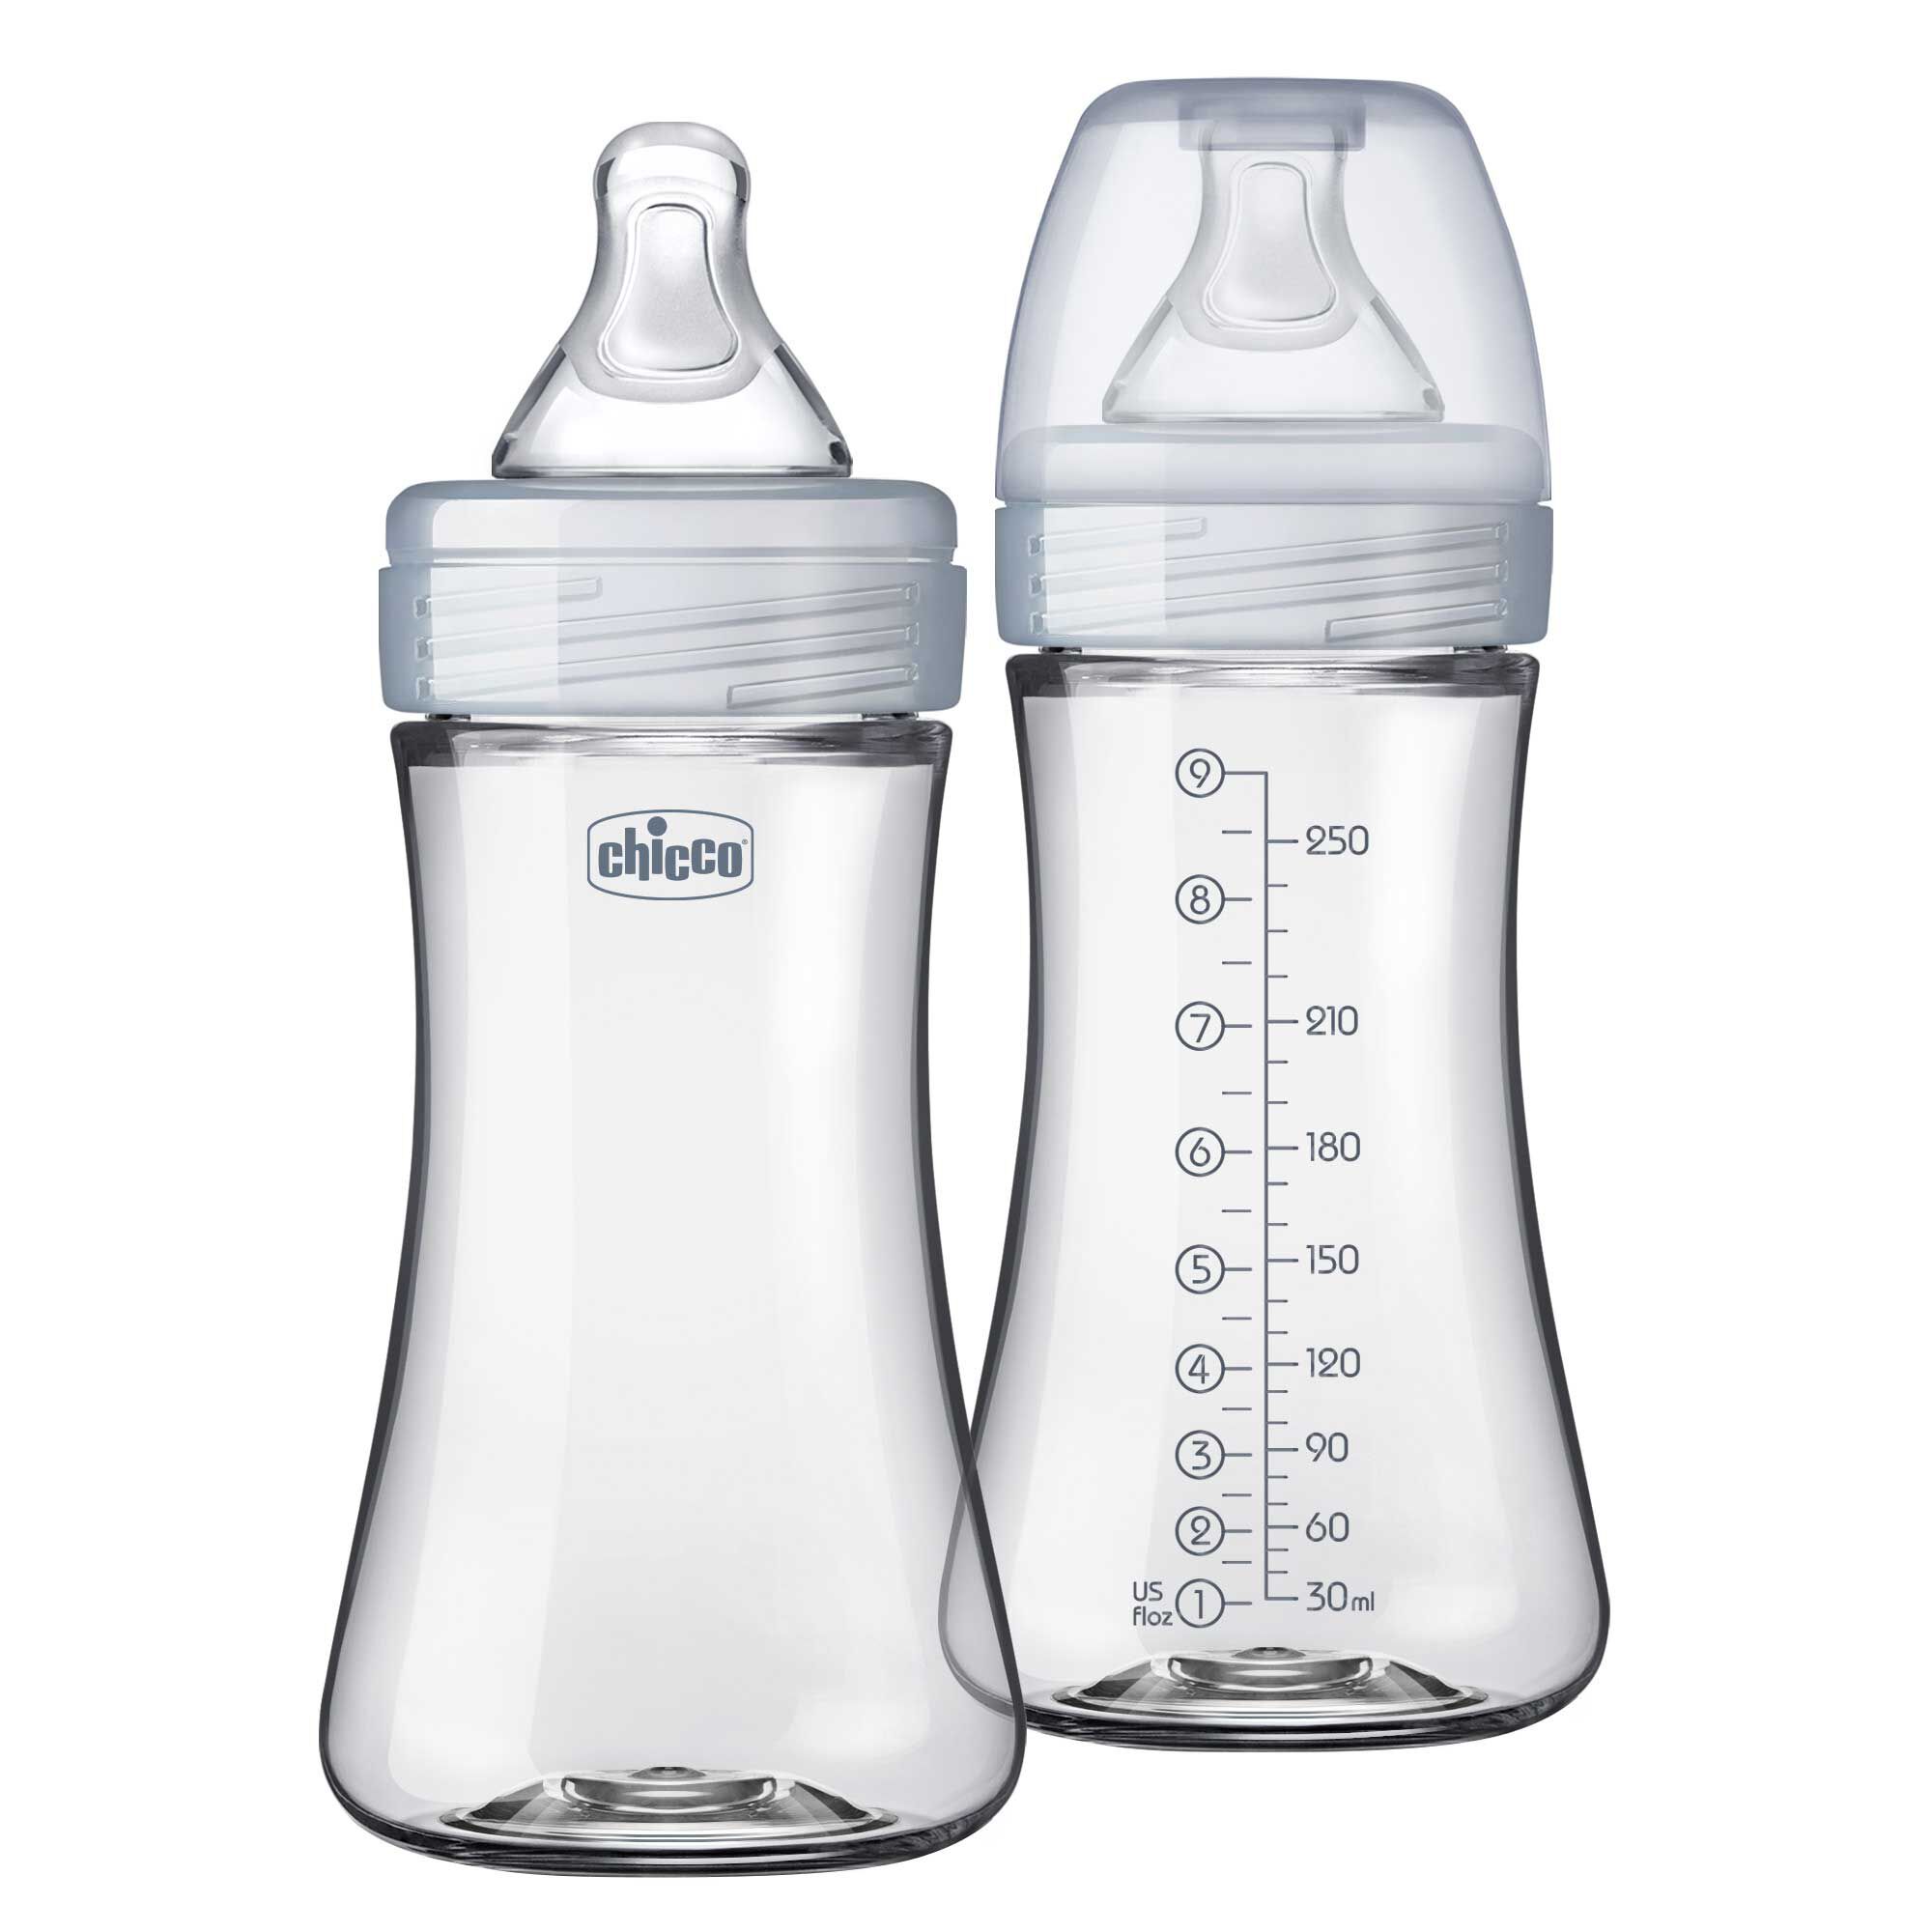 https://www.chiccousa.com/dw/image/v2/AAMT_PRD/on/demandware.static/-/Sites-chicco_catalog/default/dw8916d531/images/products/feeding/duo-bottle/chicco-duo-bottle-9oz-neutral-2pk.jpg?sw=2000&sh=2000&sm=fit